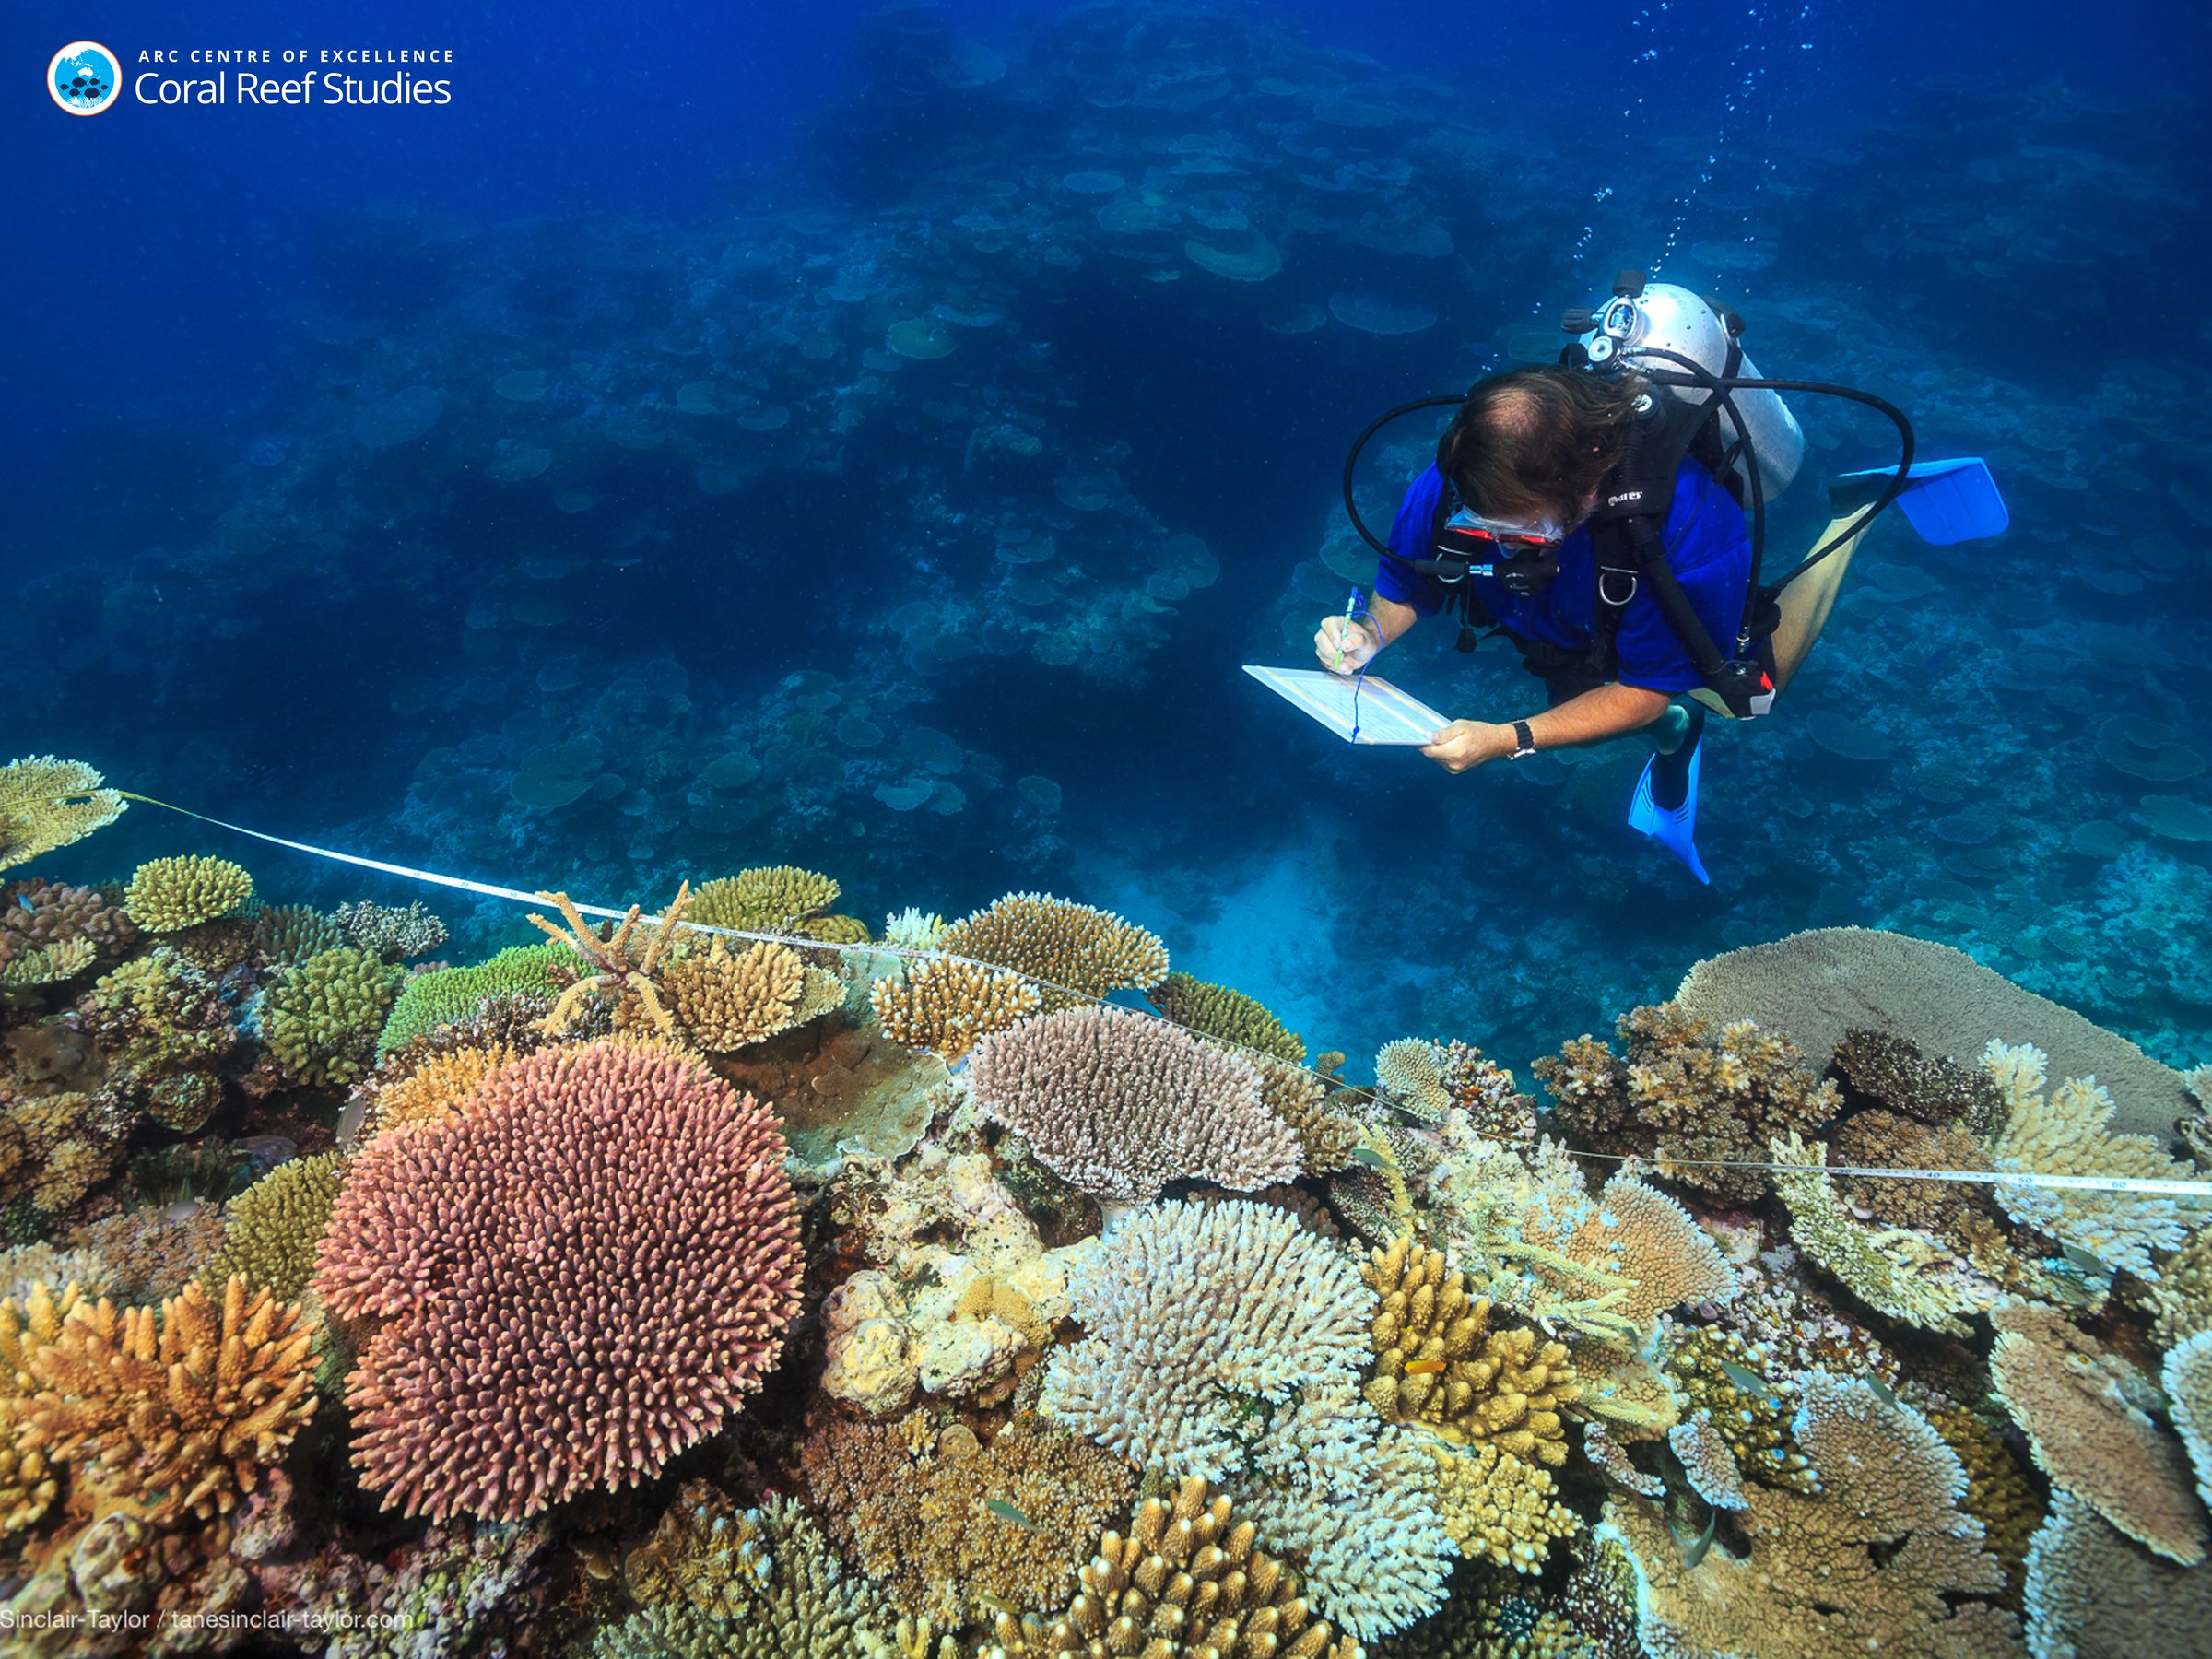 Scientist Andrew Baird surveying healthy reefs on the Great Barrier Reef in October 2016.